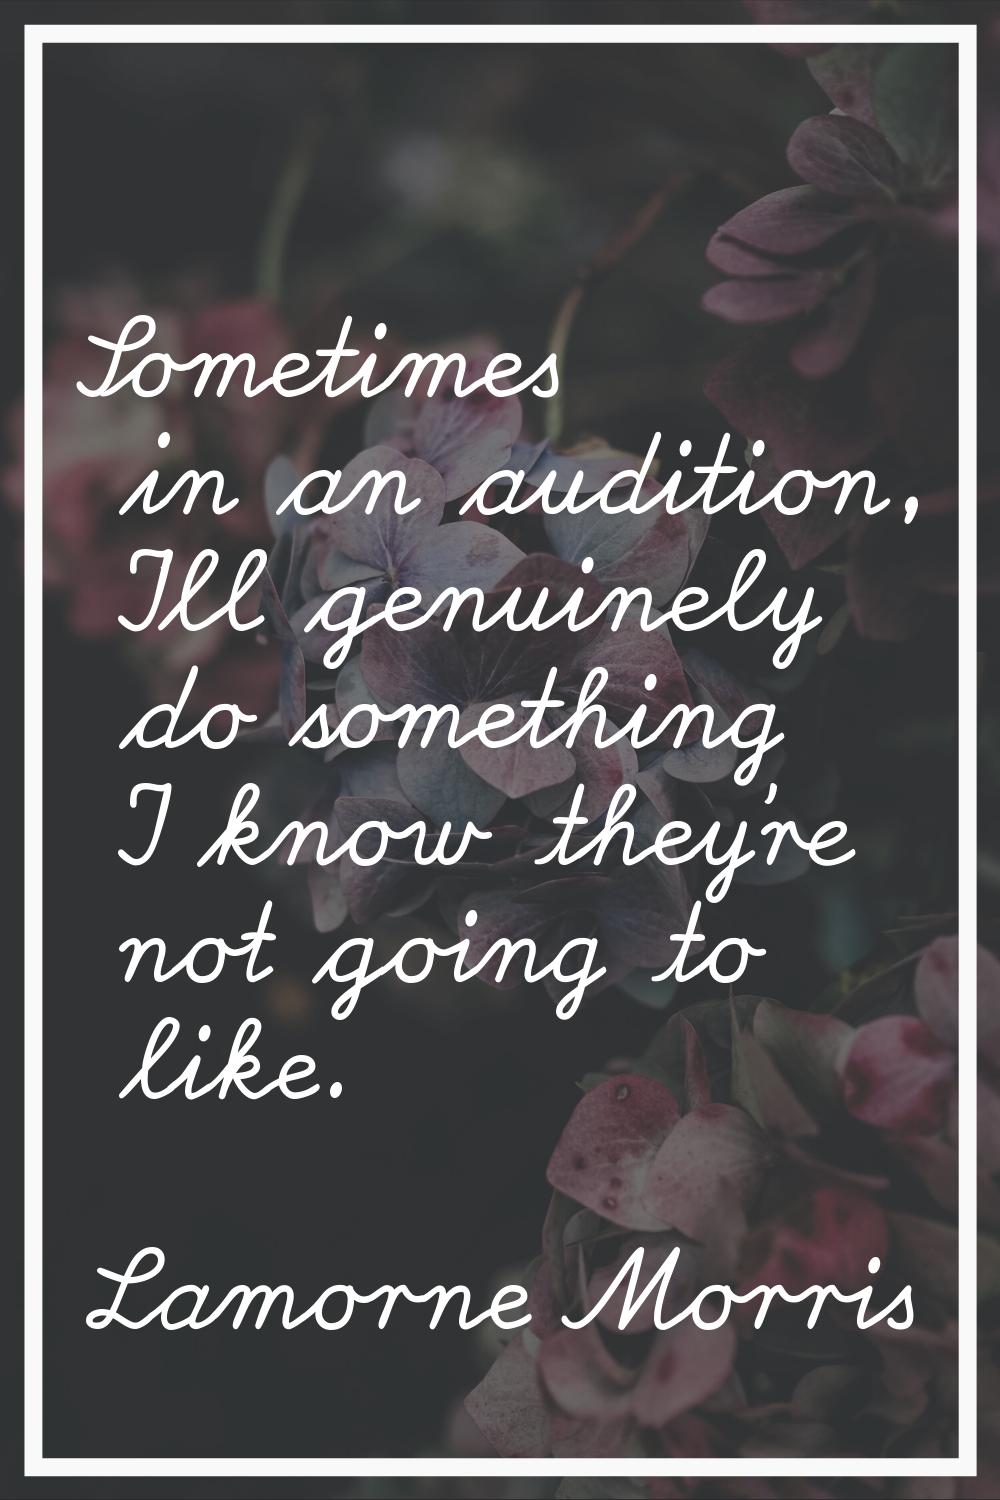 Sometimes in an audition, I'll genuinely do something I know they're not going to like.